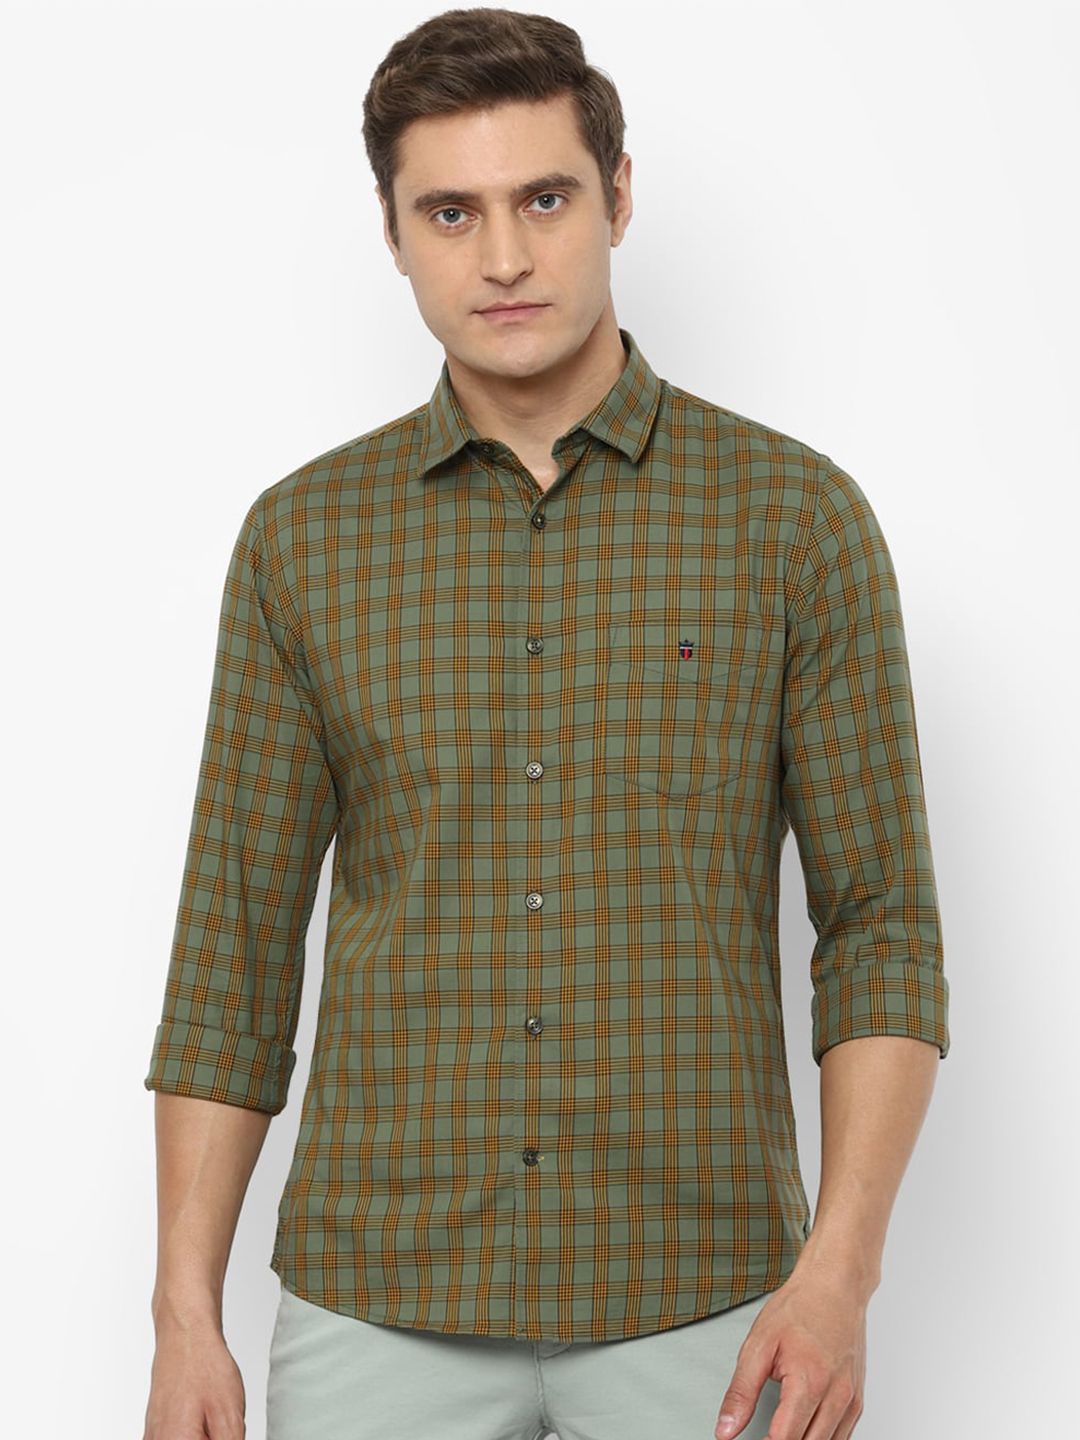 Louis Philippe Sport Men Checkered Casual Pink Shirt - Buy Louis Philippe  Sport Men Checkered Casual Pink Shirt Online at Best Prices in India